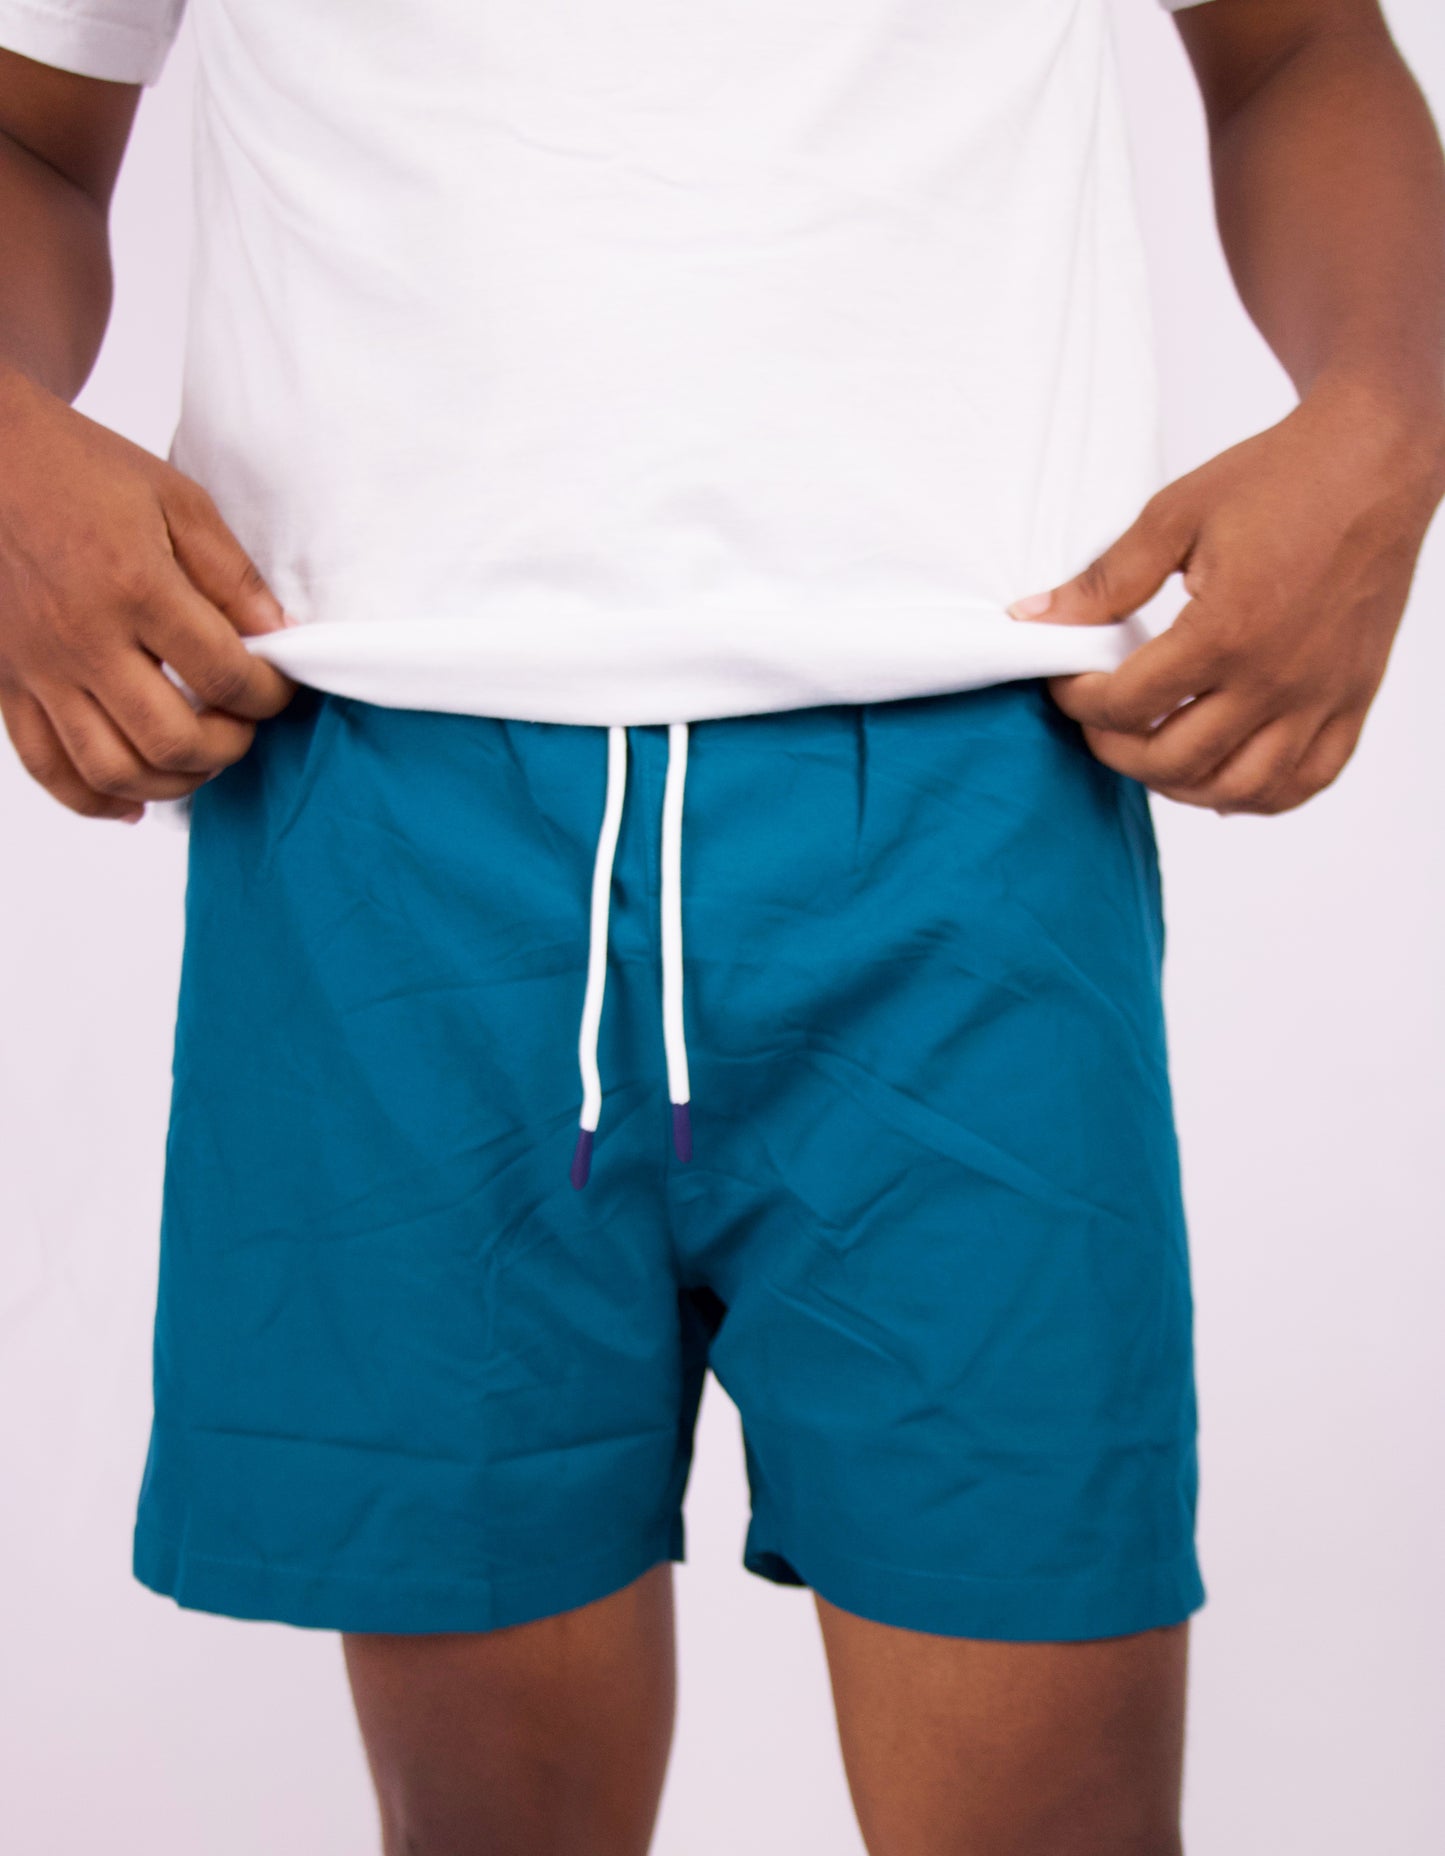 Abound Tropical Swim Shorts in turquoise